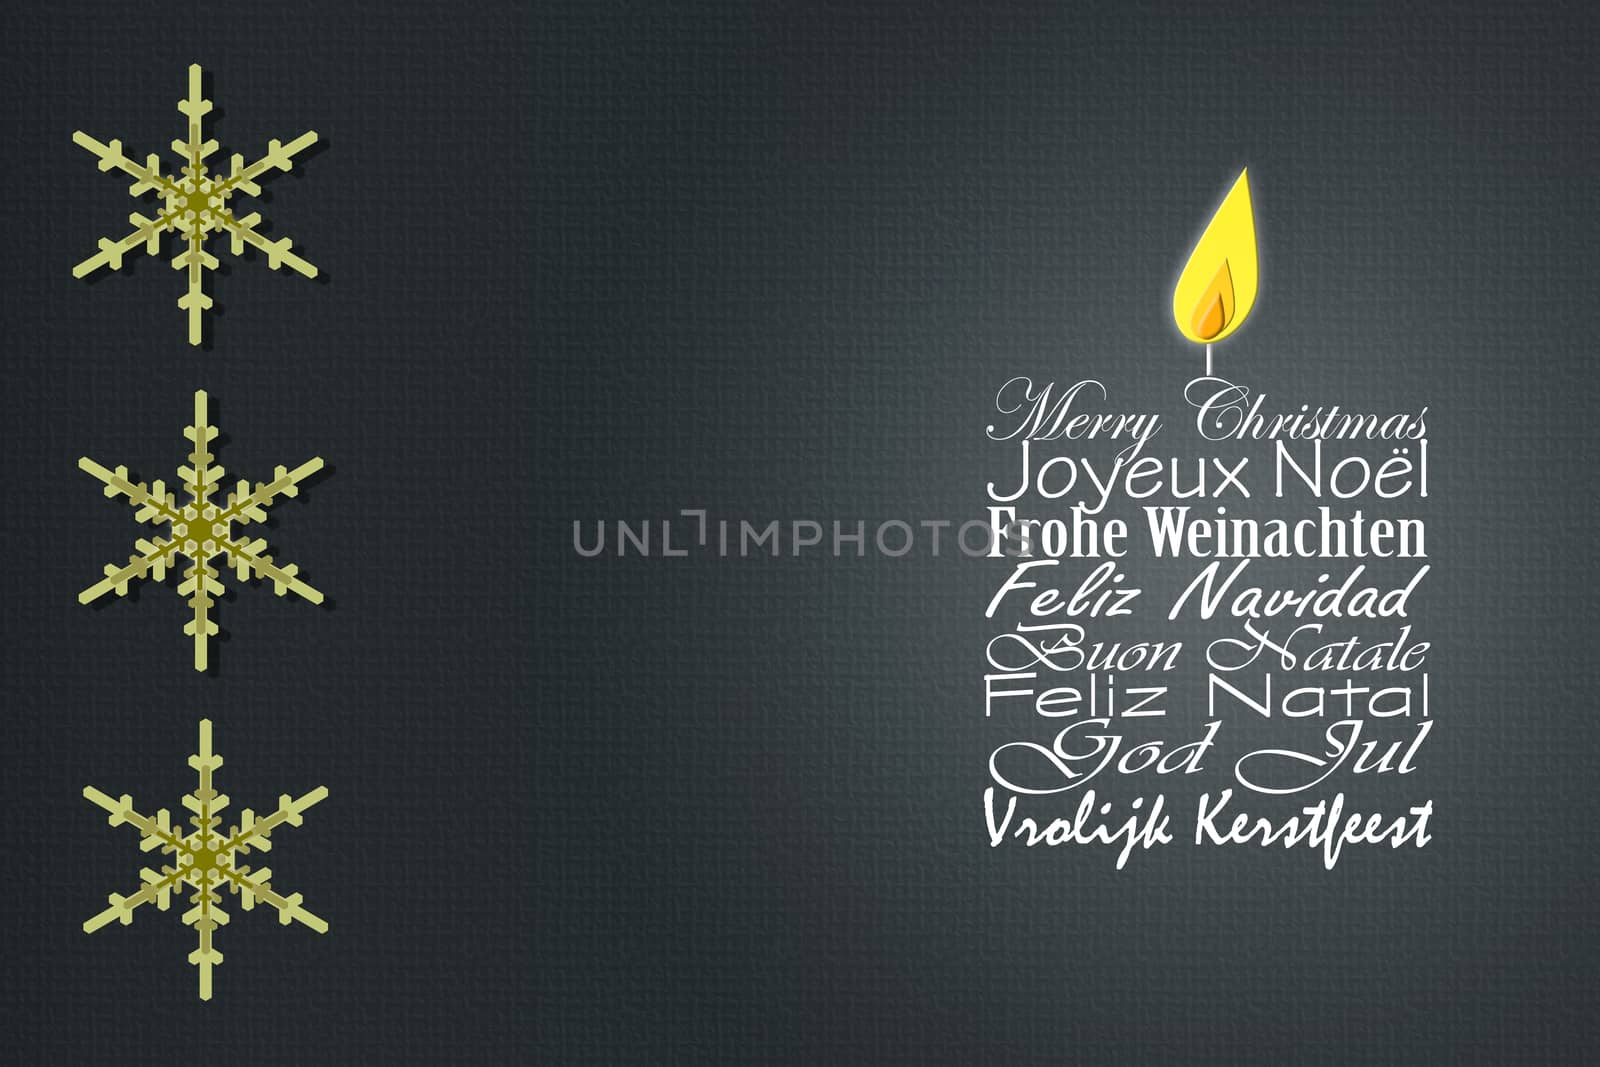 Merry Christmas wishes card in Europian languages by NelliPolk